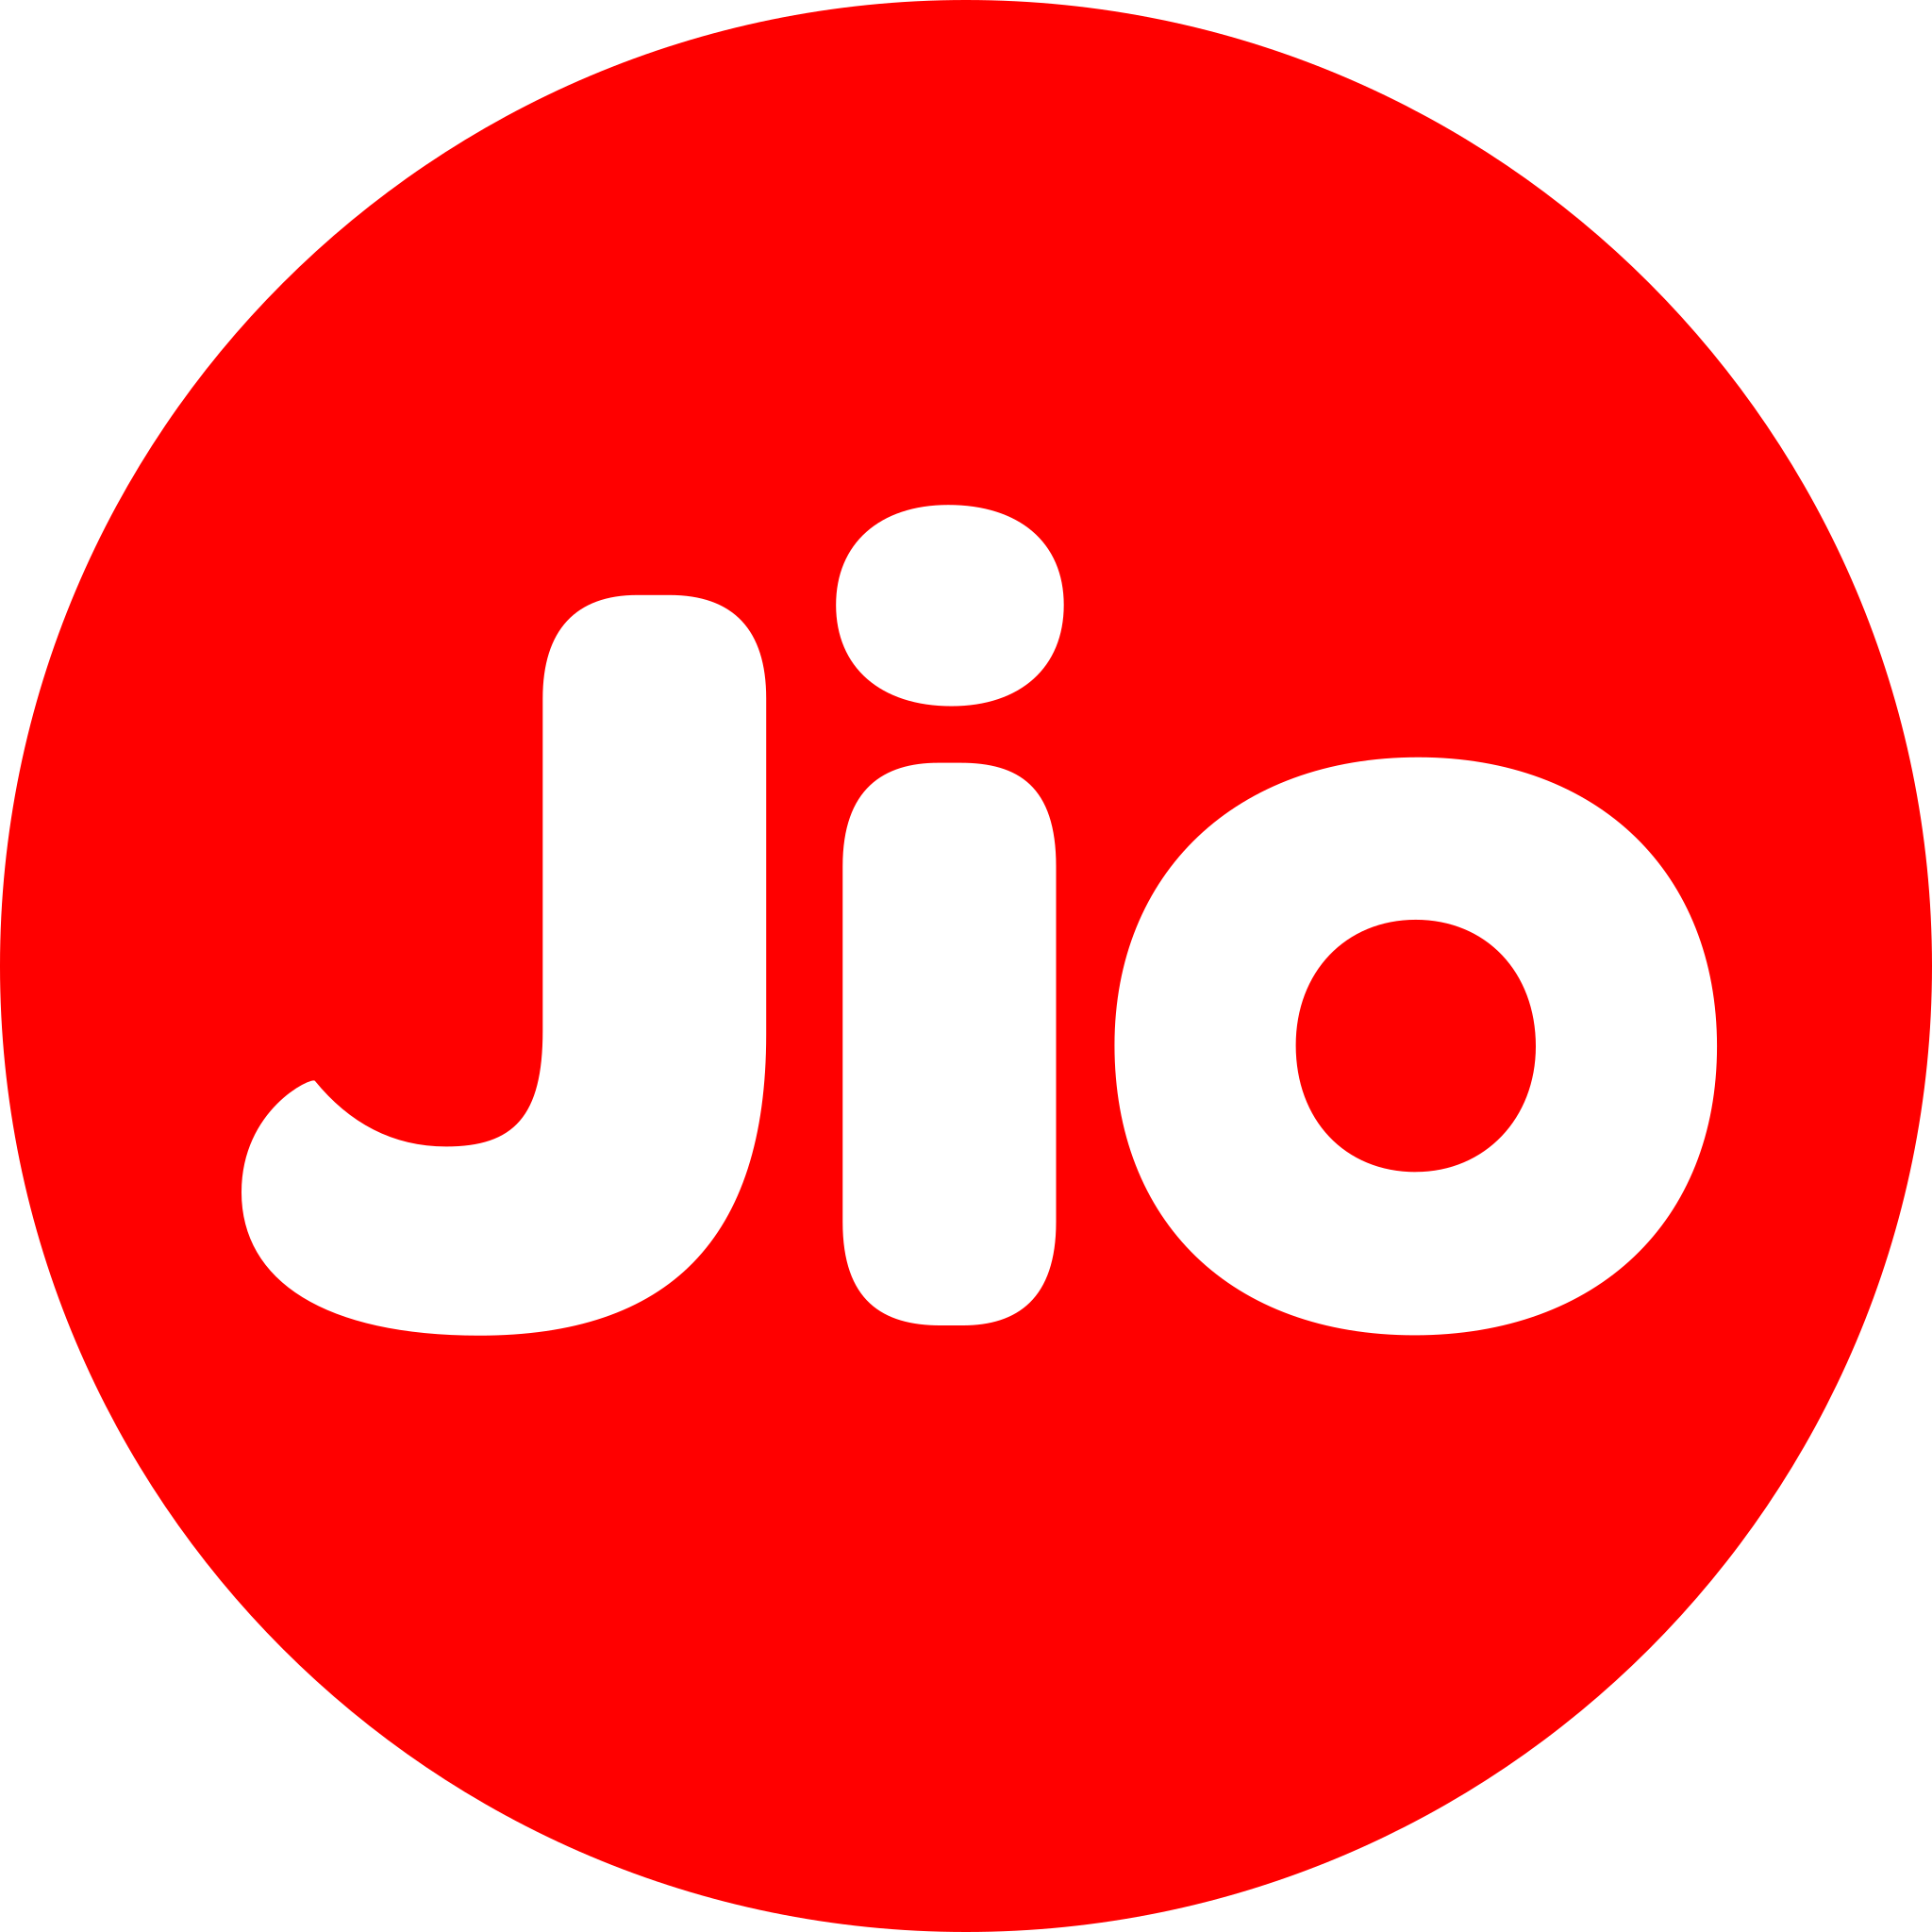 Reliance Jio Introduces New Data Booster Plans with 5G Benefits